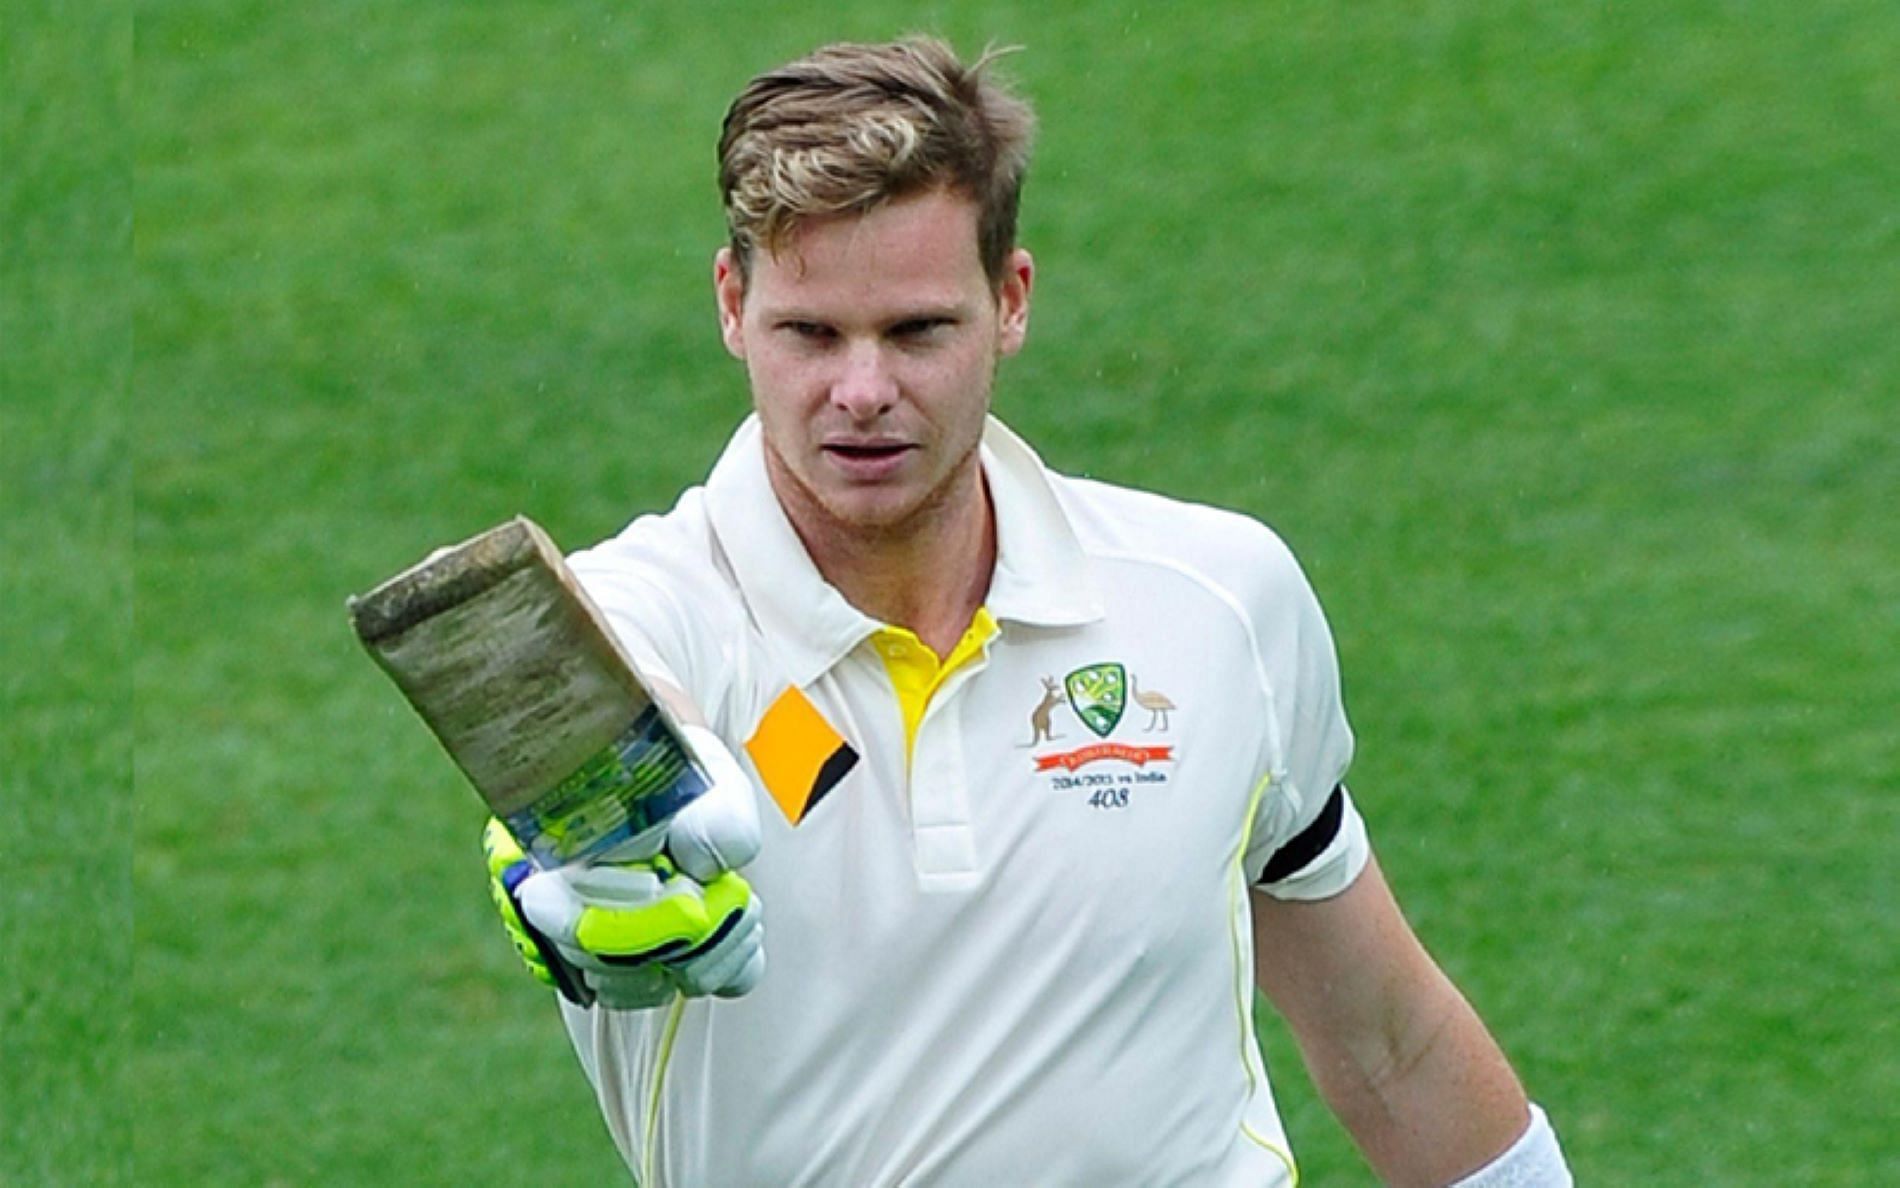 Steve Smith has been arguably the greatest test batter of this generation